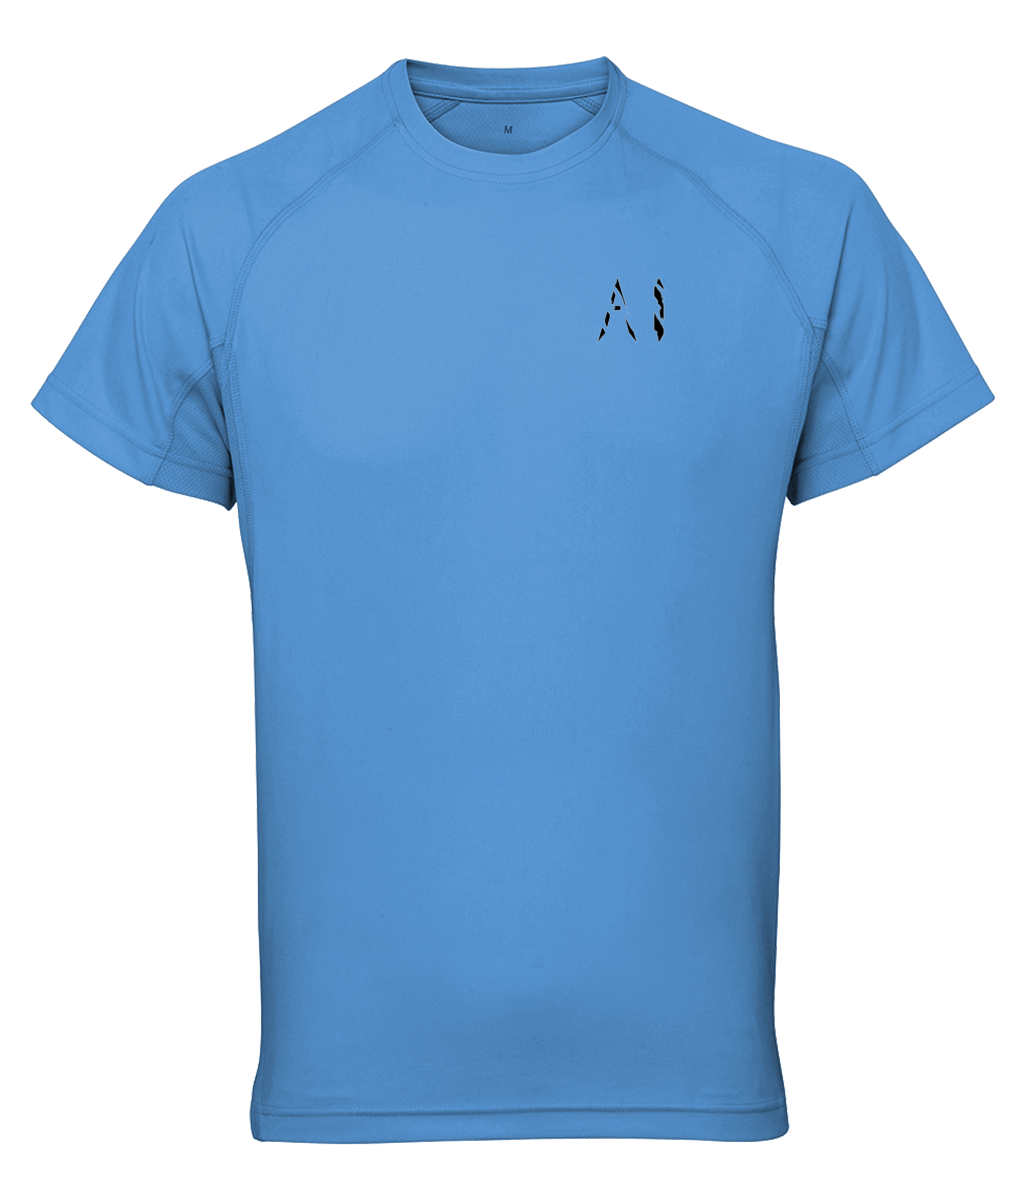 Mens blue Athletic Performance Top with black AI logo on the left chest